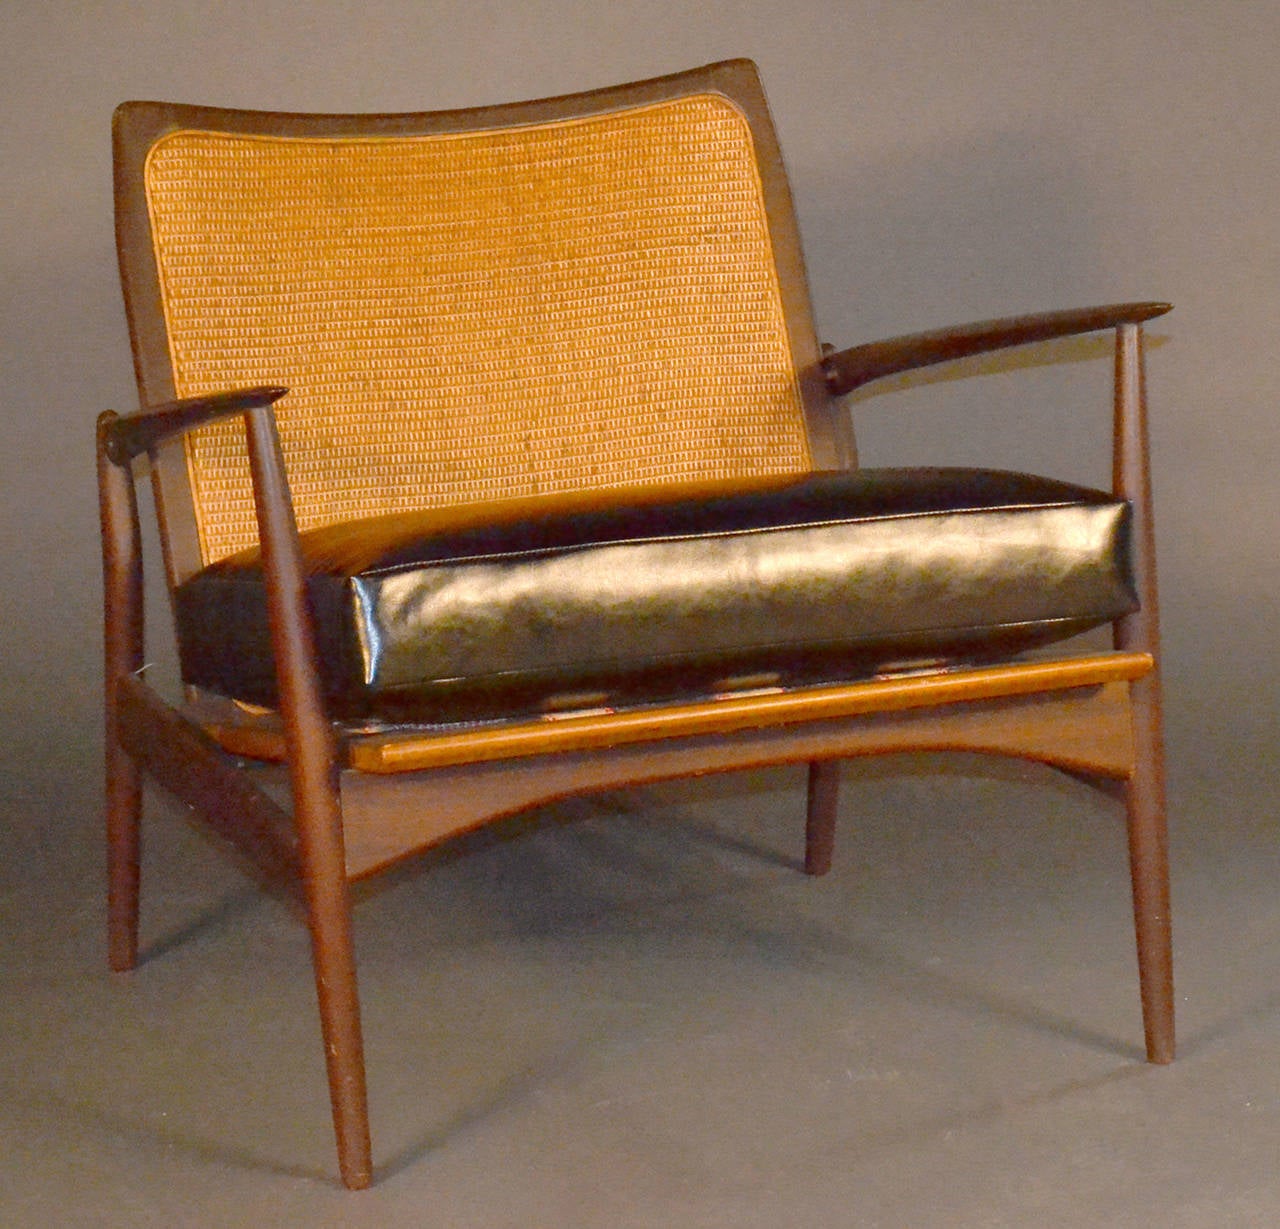 Very unique caned back teak lounge chair. Newly replaced caned back to match original. Brand new vinyl cushion and seat straps.